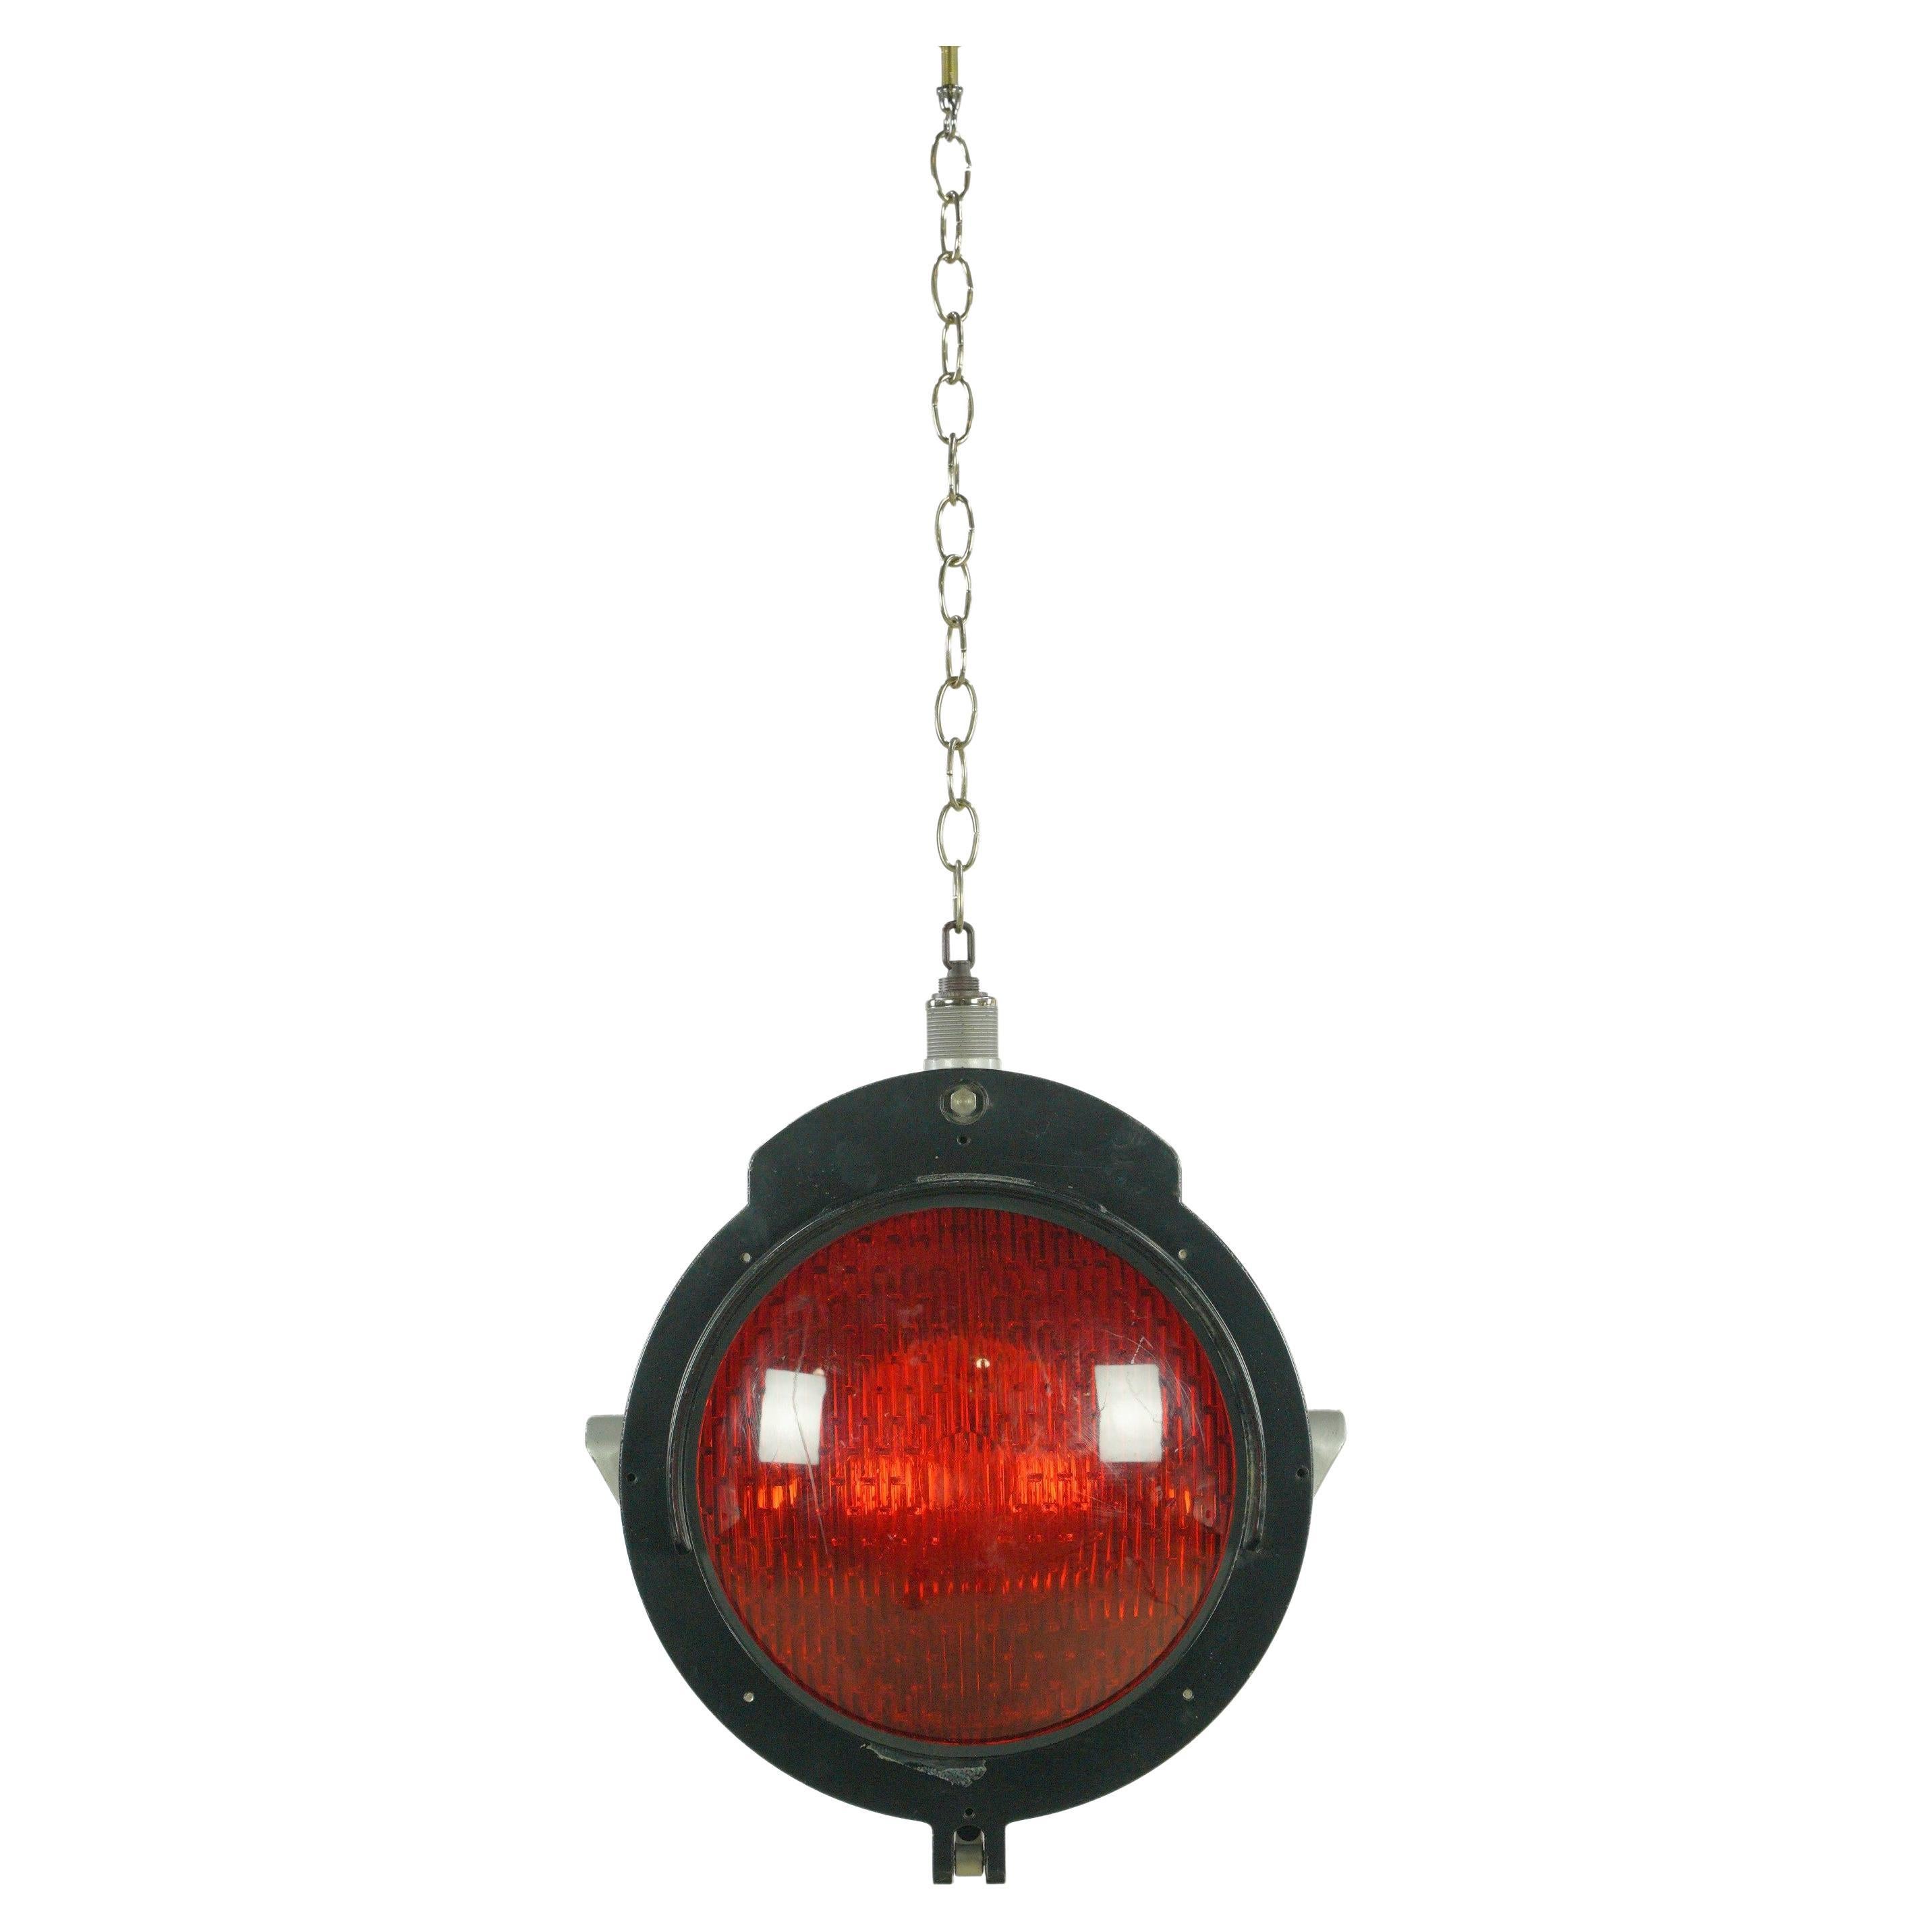 Safetran Systems Corp. Aluminum Red Glass Railroad Light